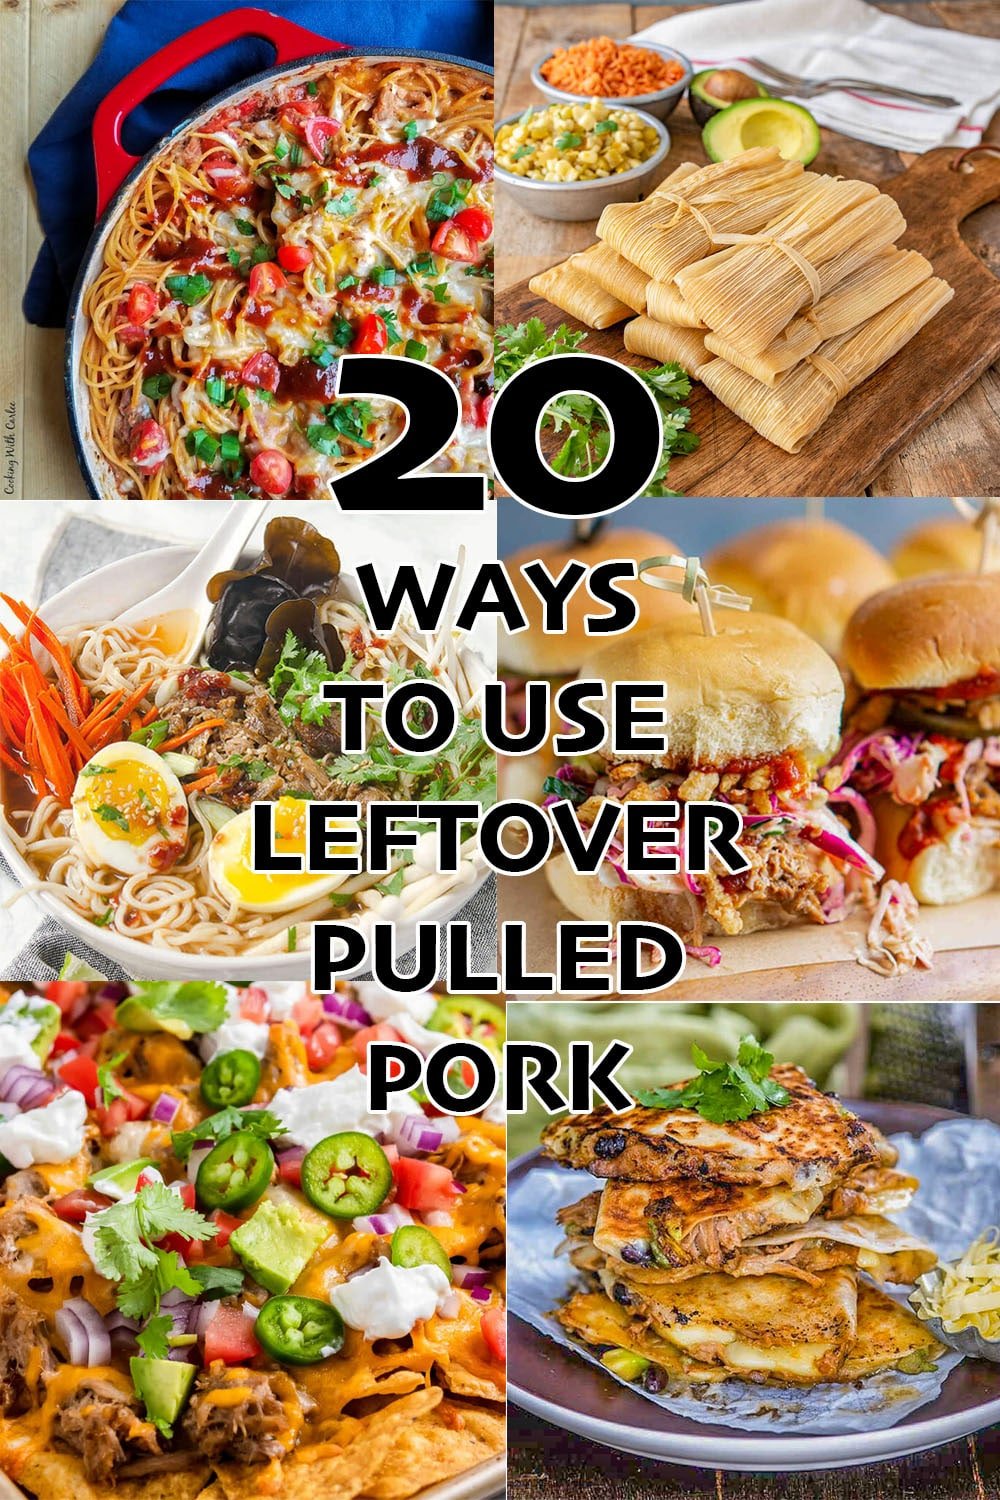 20 Ways to Use Leftover Pulled Pork